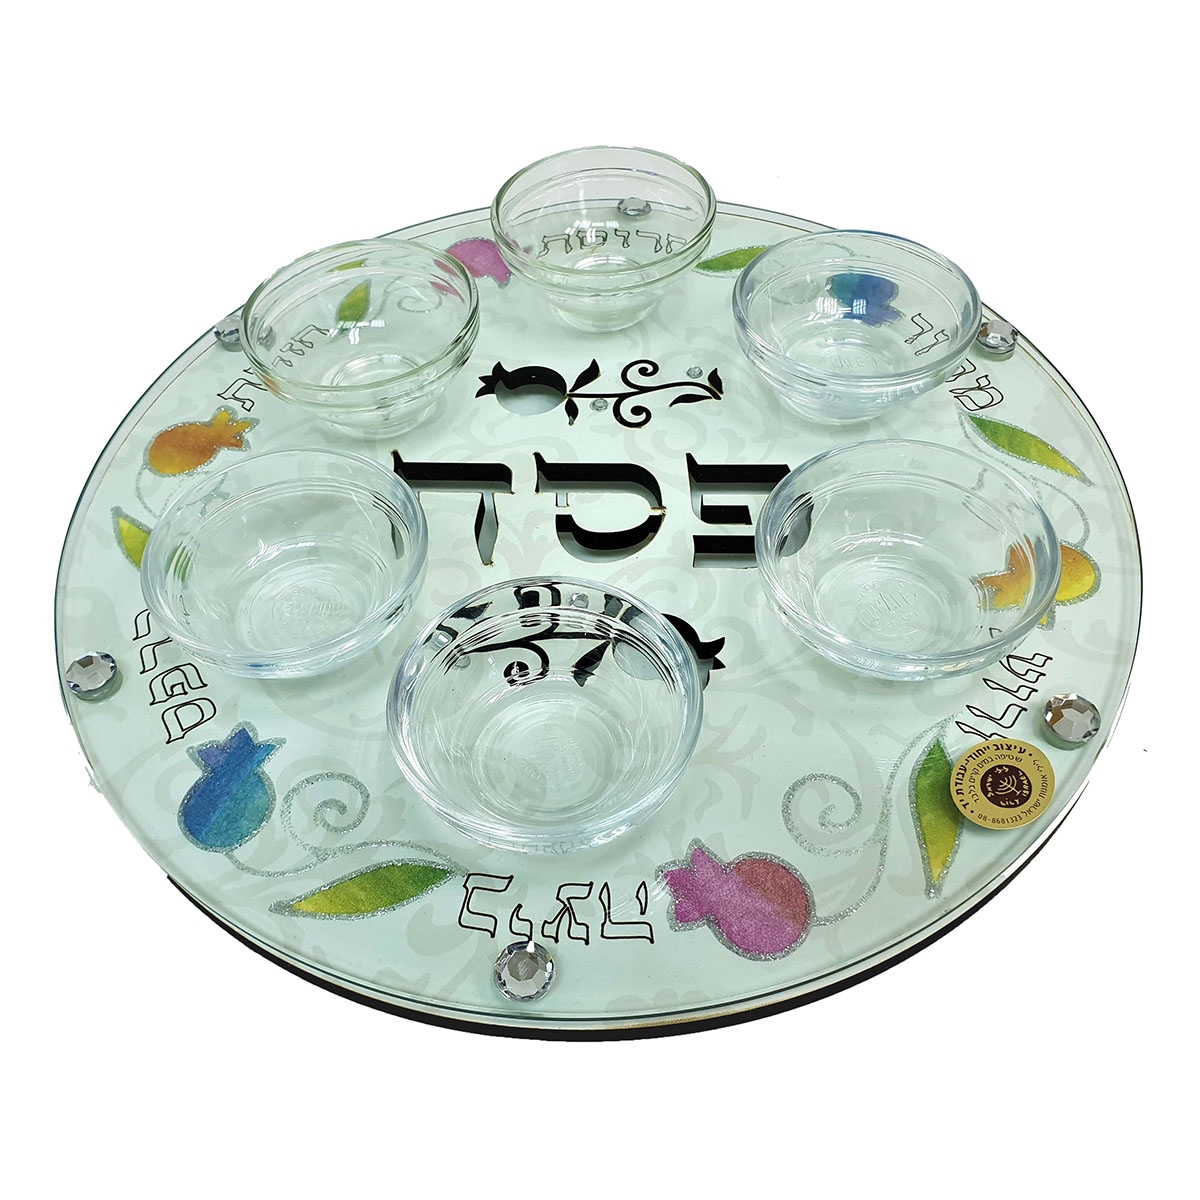 Lily Art Hand-Painted Glass Seder Plate With Colorful Pomegranate Motif - 1